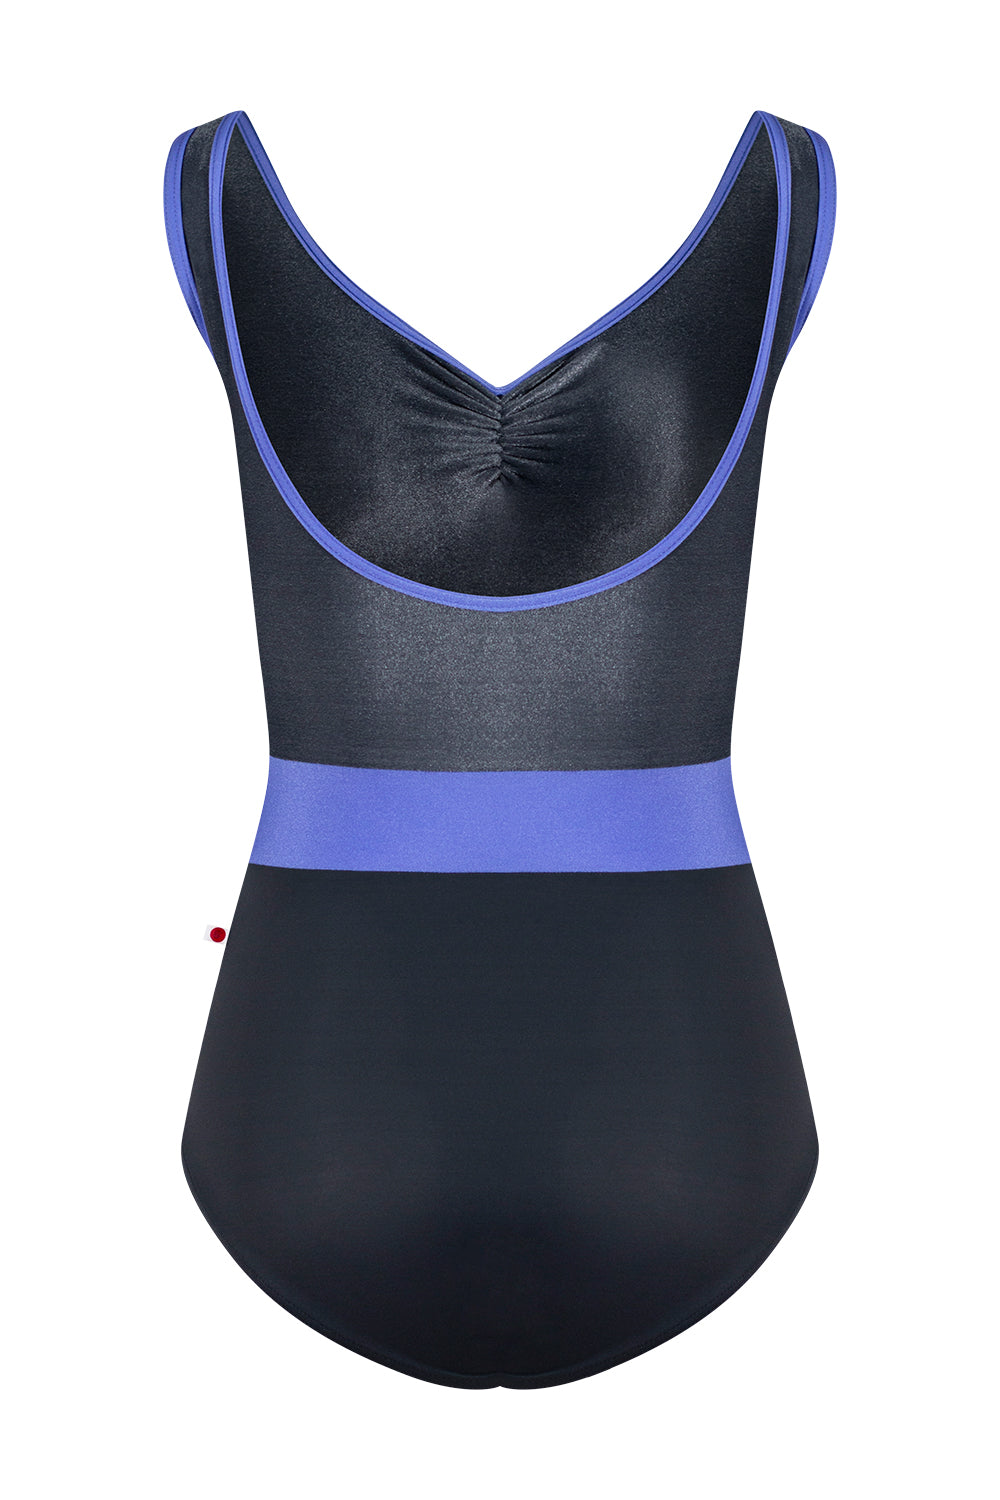 Lucy leotard in T-Titanium body color with V-Steel top color and N-Lavender trim & Middle band color